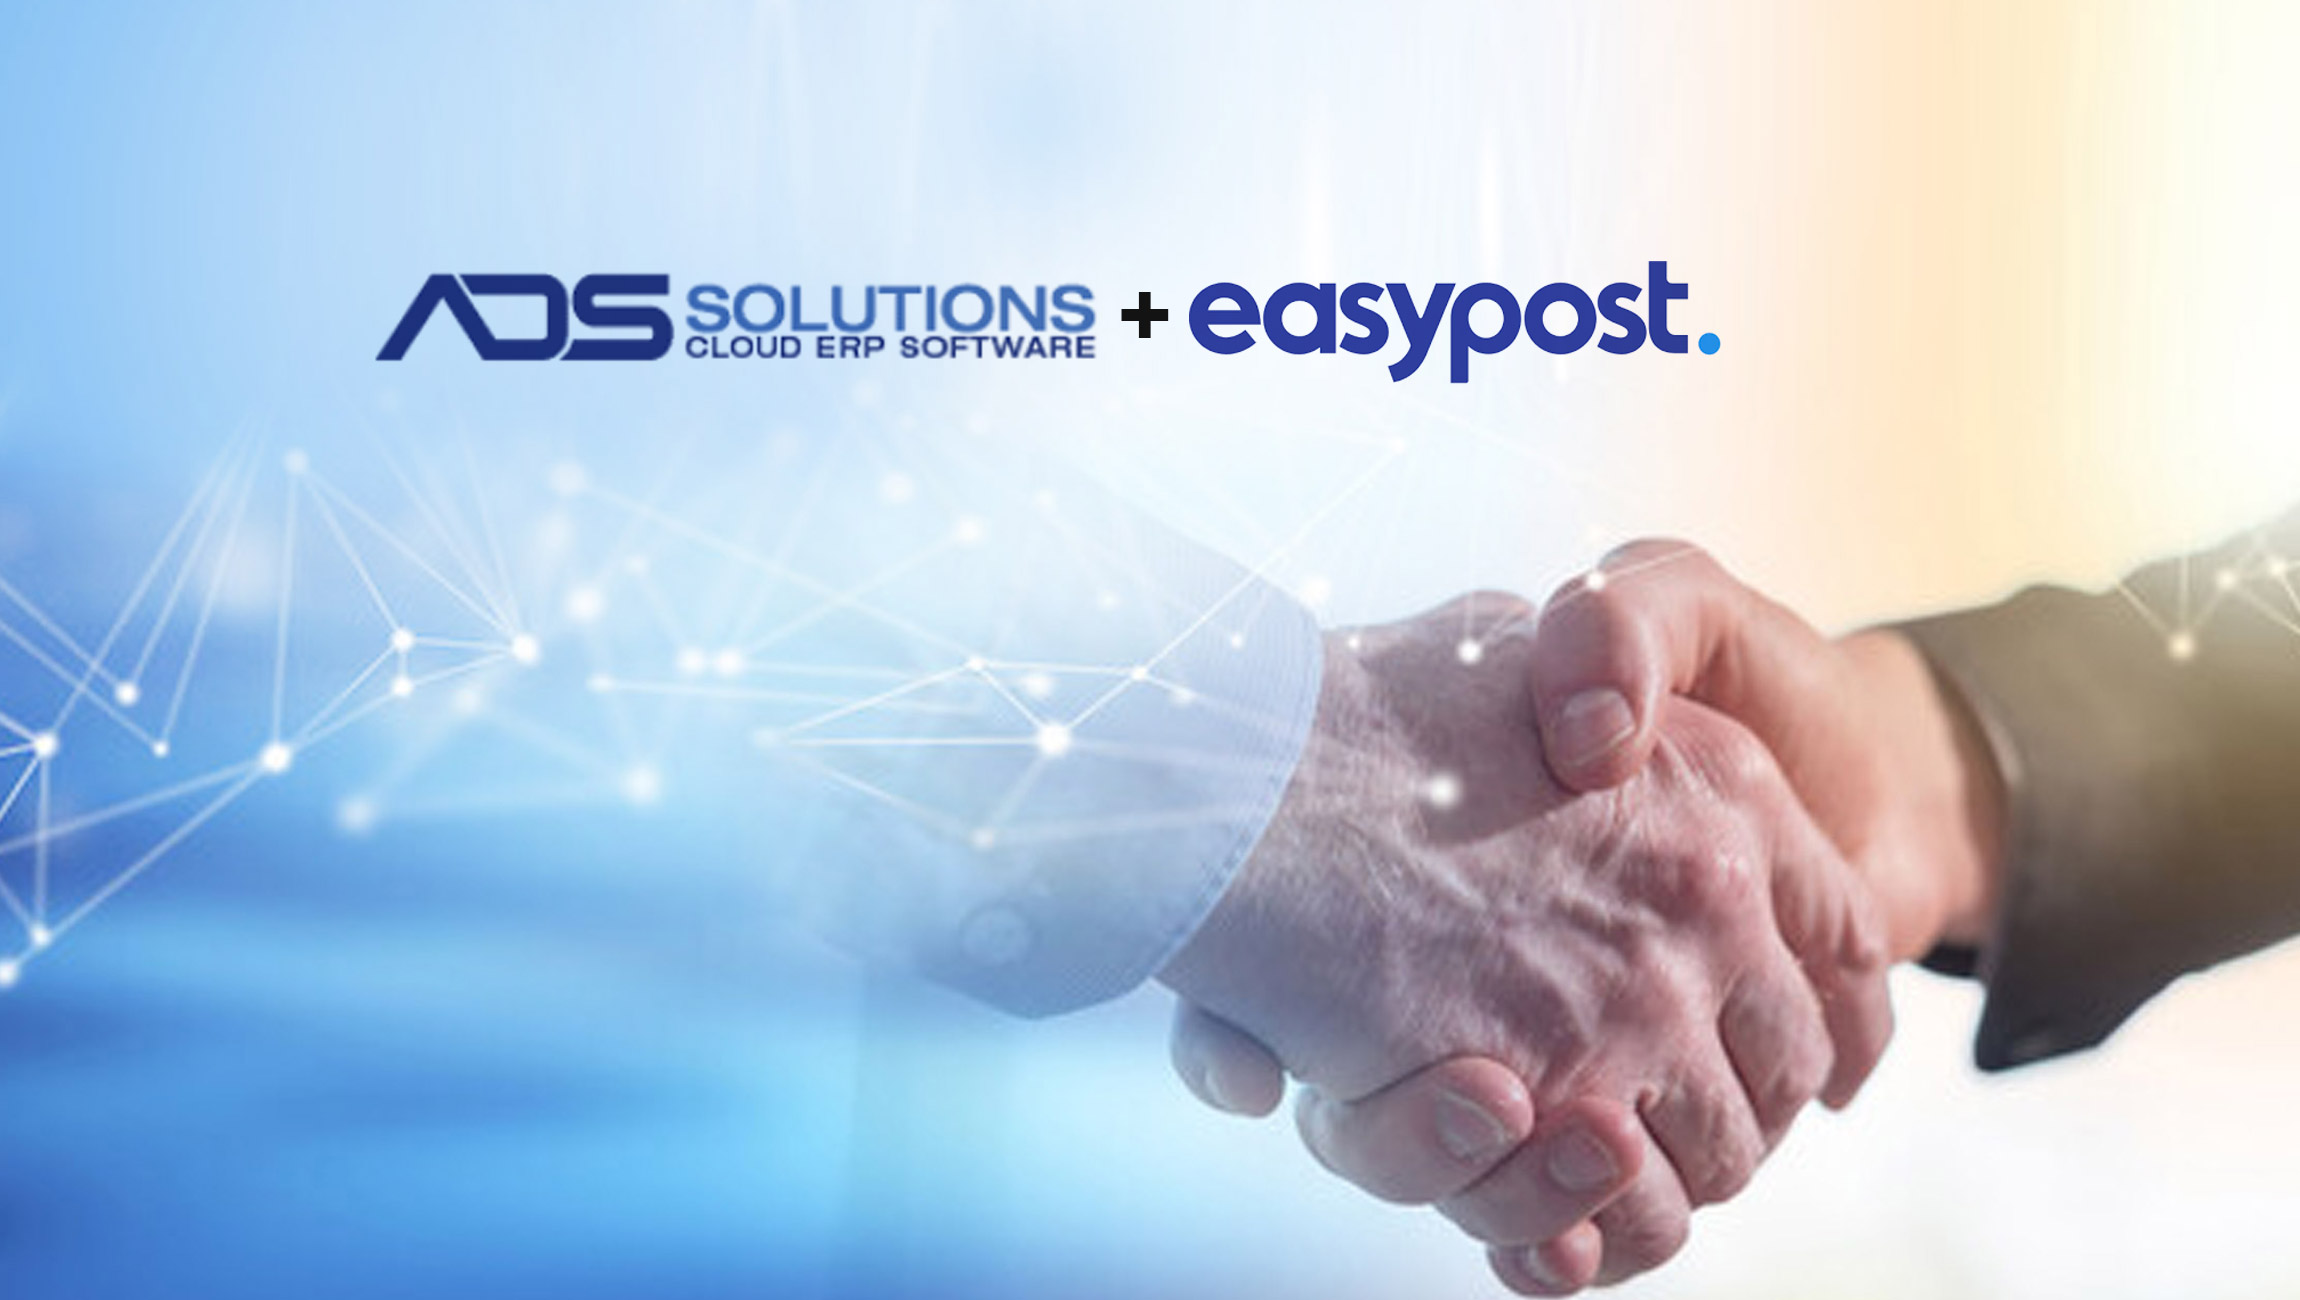 ADS-Solutions-and-EasyPost-announce-a-partnership-to-provide-Accolent-ERP-users-with-access-to-EasyPost’s-complete-shipping-solution